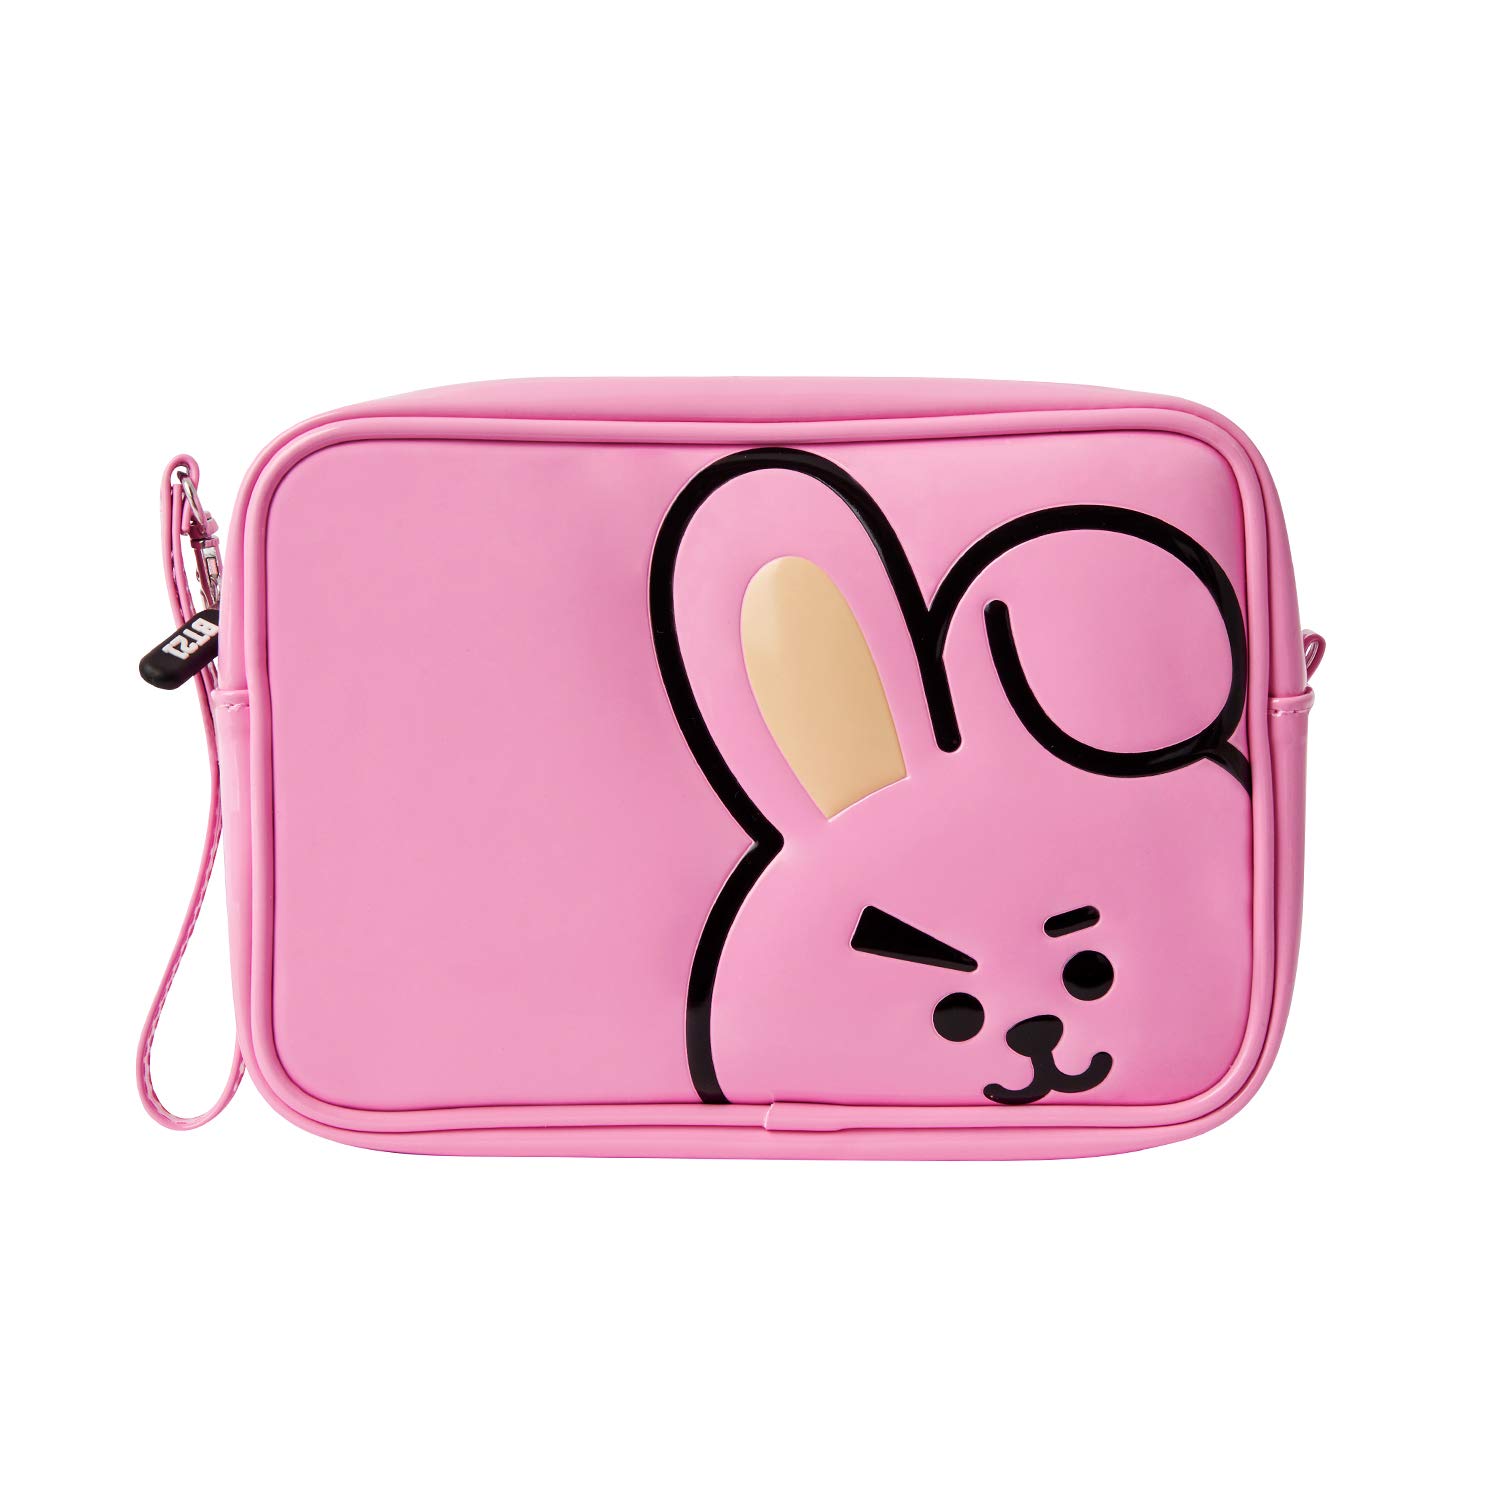 Book Cover BT21 Official Merchandise by Line Friends - COOKY Enamel Cosmetic Bag Travel Pouch for Toiletry and Makeup